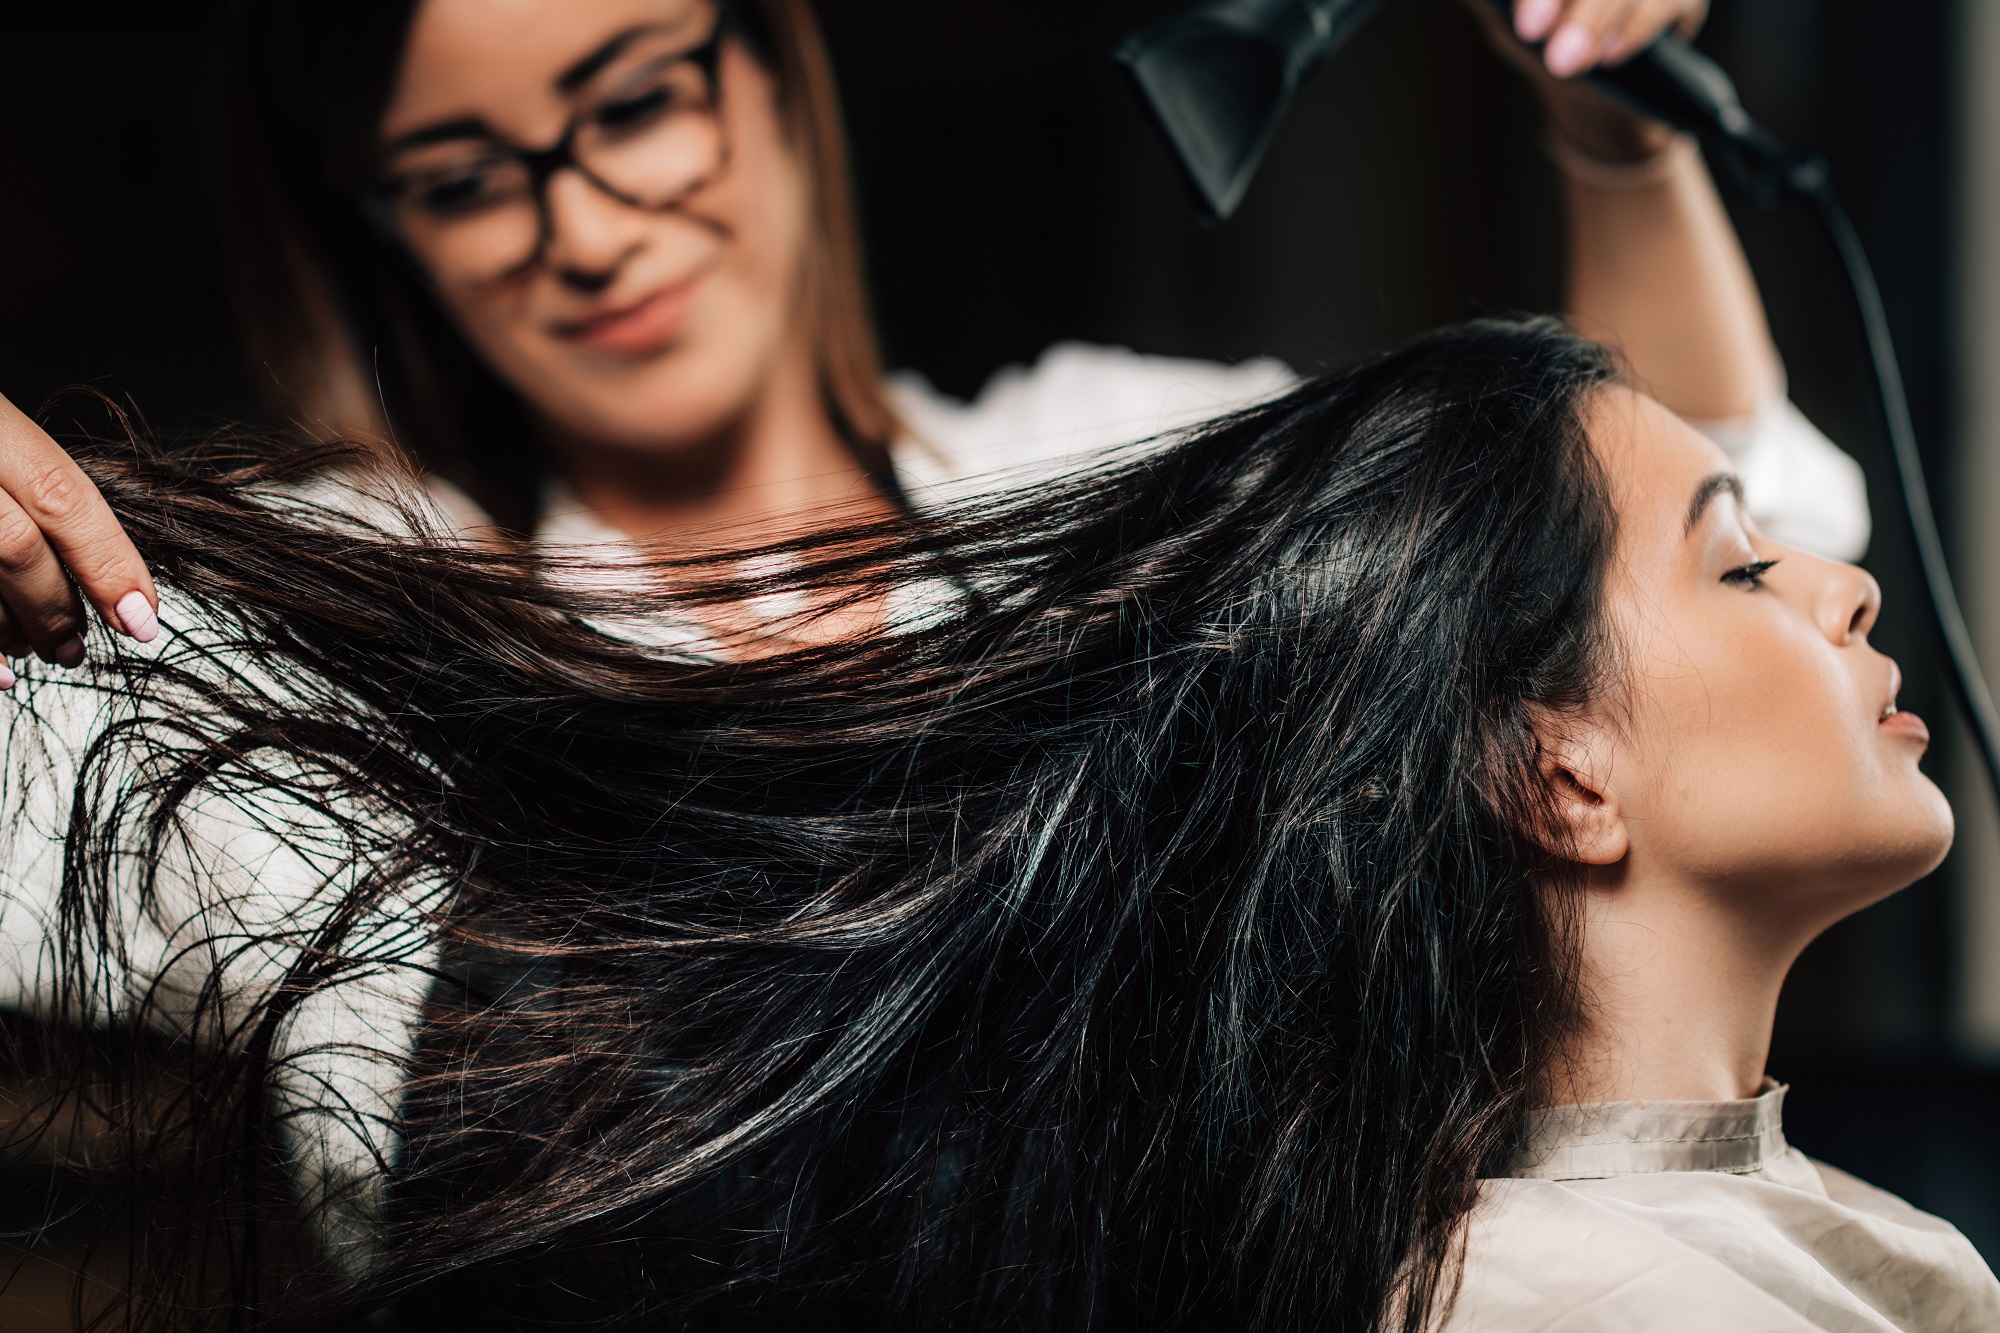 Hairdresser drying woman’s long black hair with hairdryer